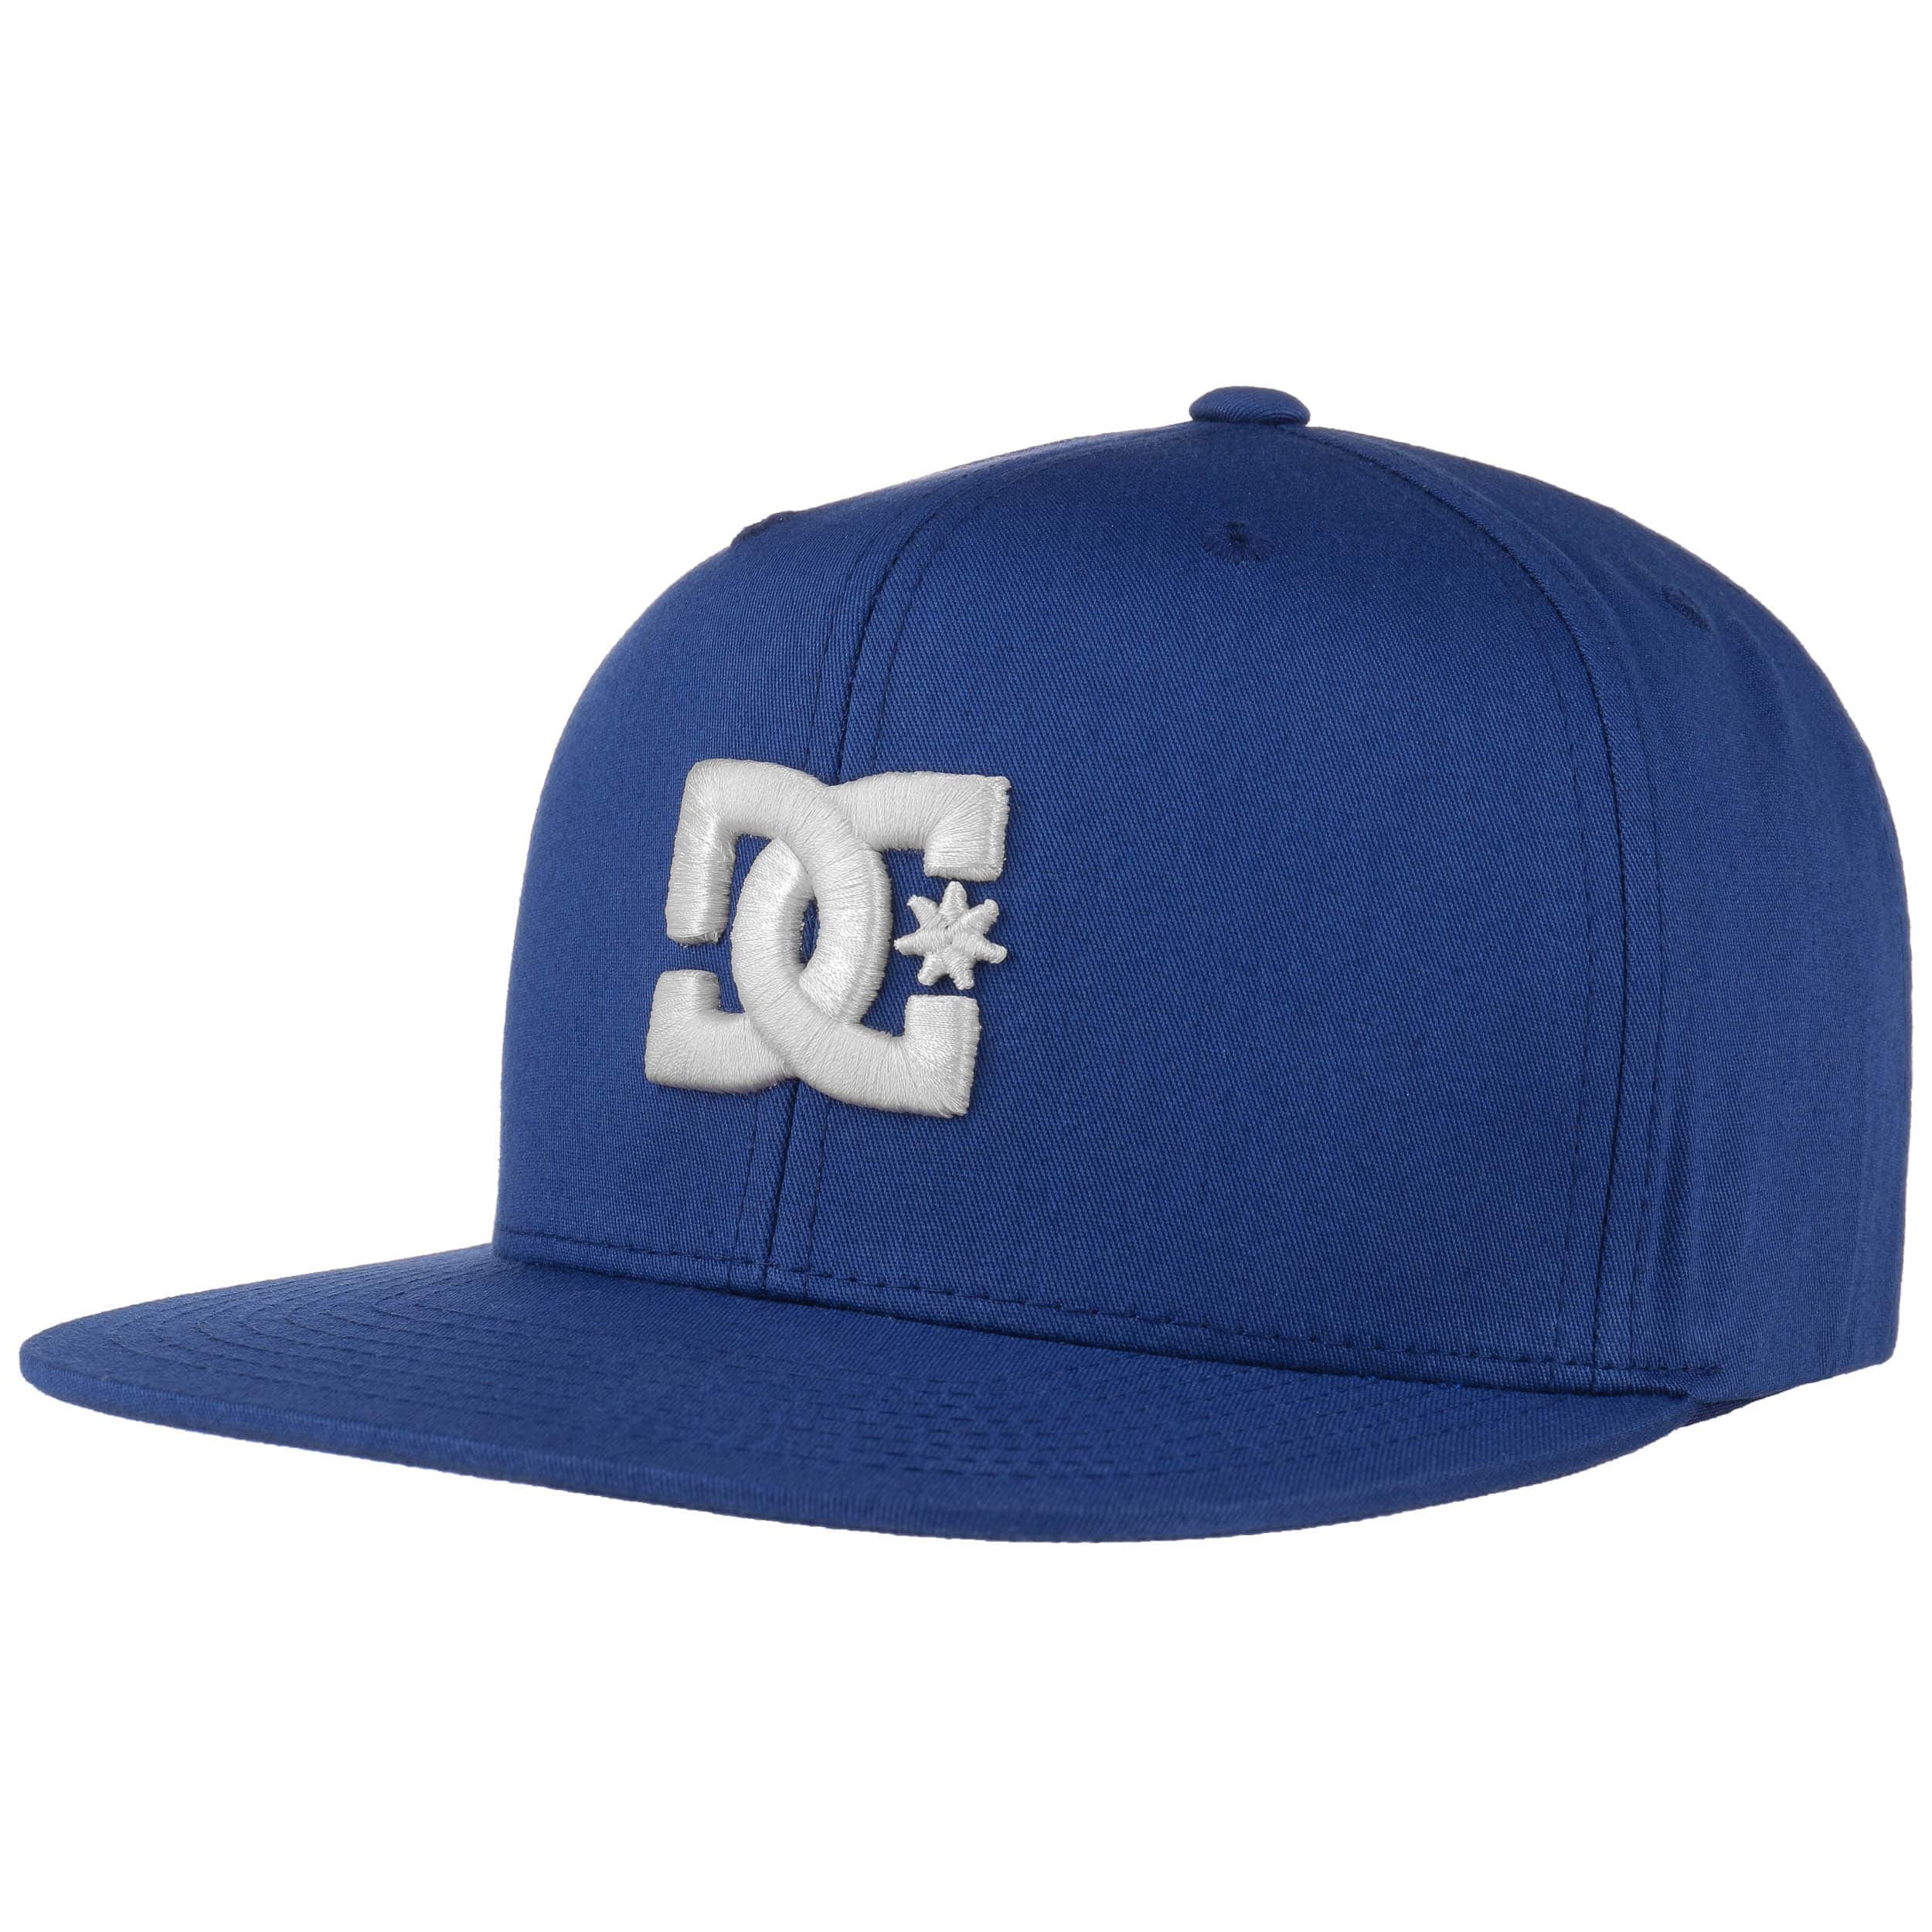 Cap by DC Co Snappy 26,95 € Shoes Snapback -